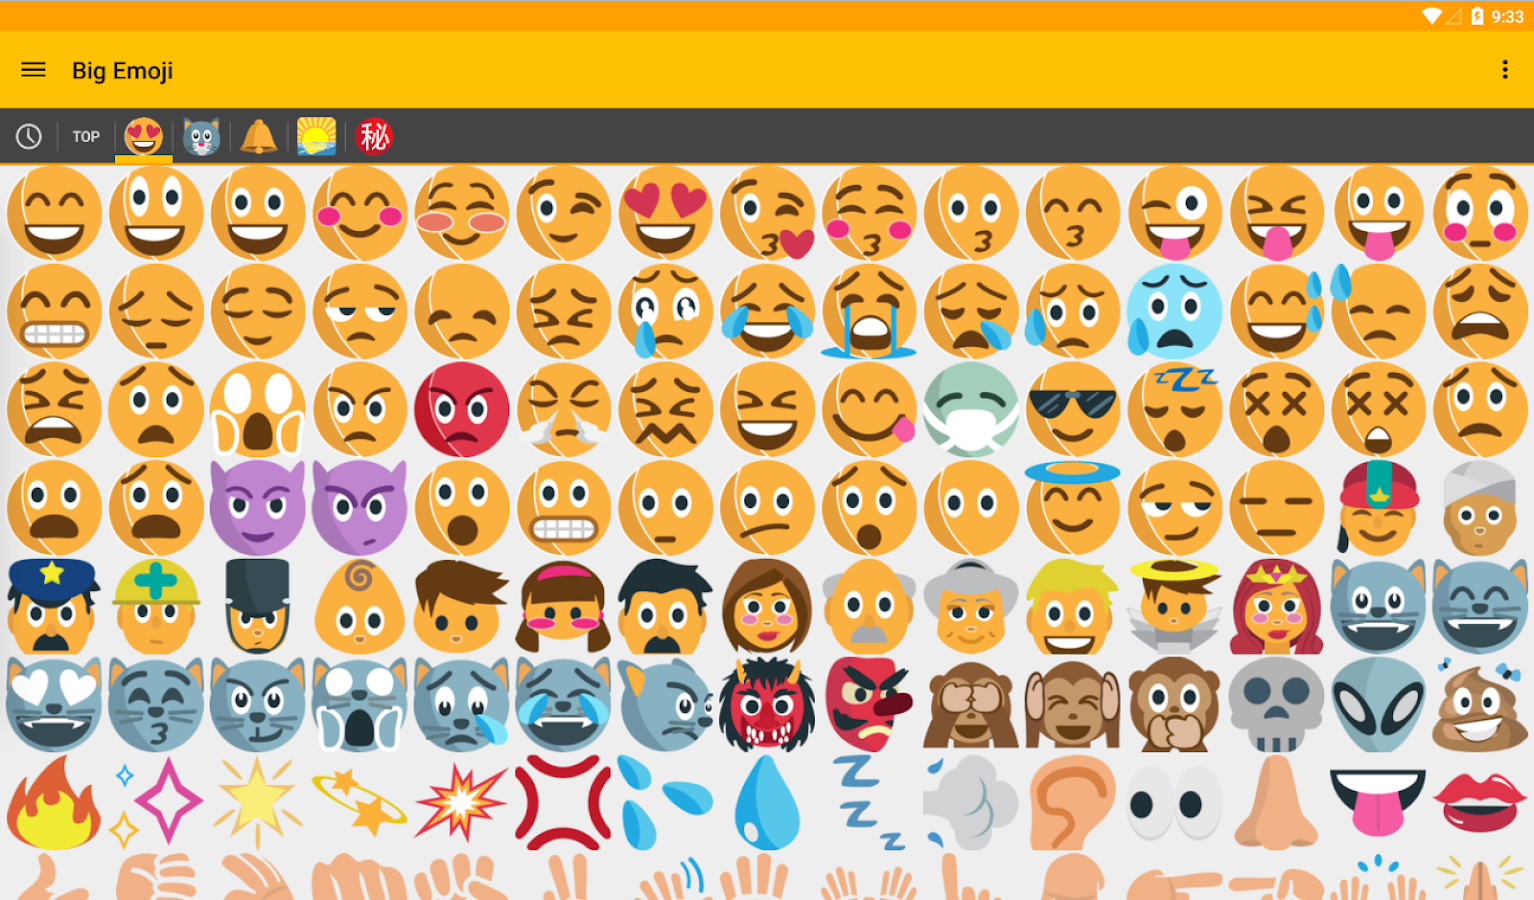 Big Emoji: big emojis for chat - Android Apps on Google Play